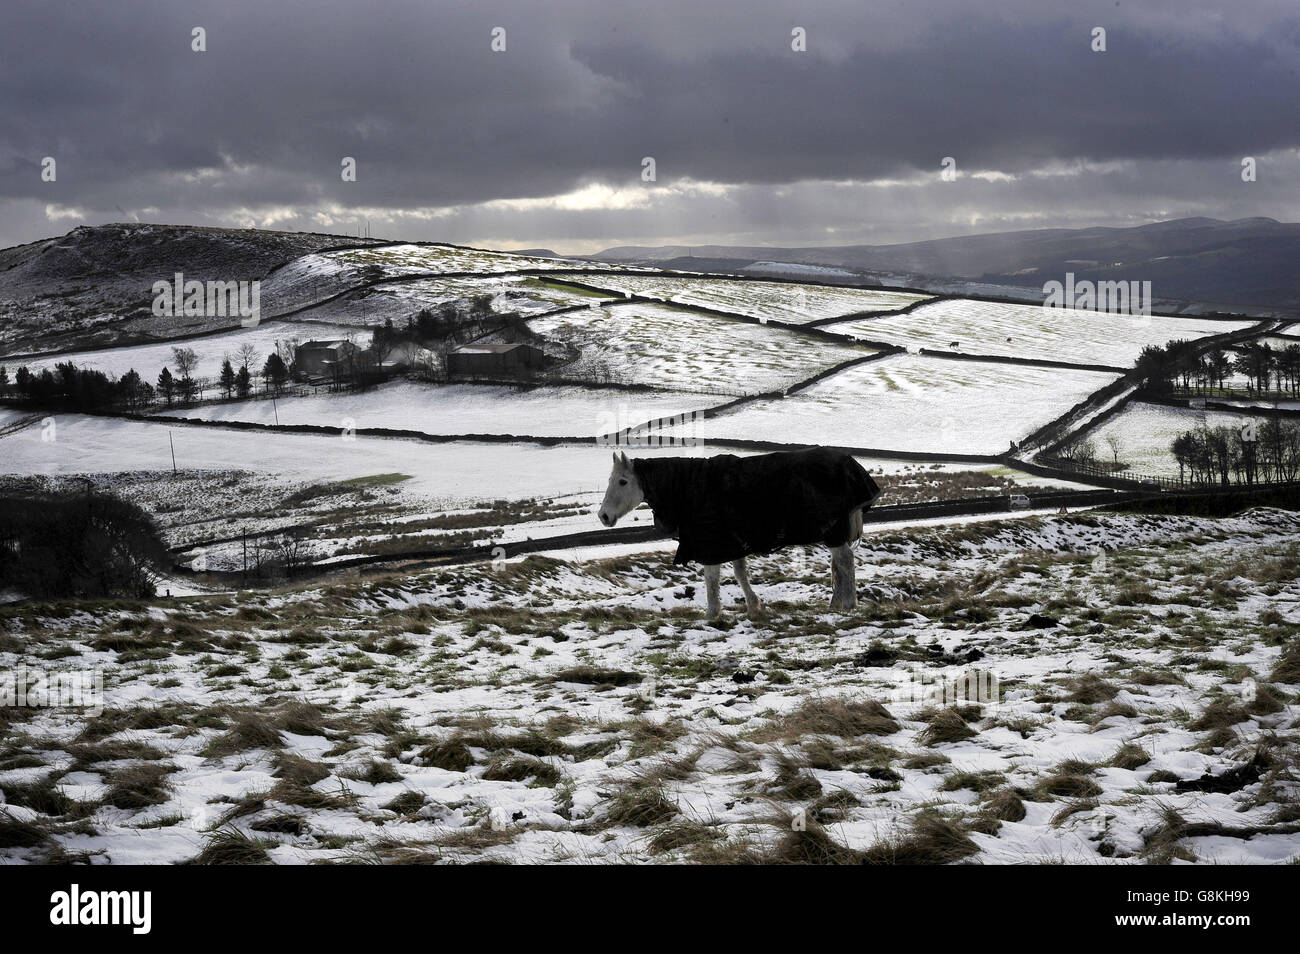 Snowfalls brought wintery conditions back to parts of the UK as overnight snow closed the Snake Pass in the Peak District, Derbyshire, and made a warm coat essential for horses on the hilltops between Glossop and Buxton. Stock Photo